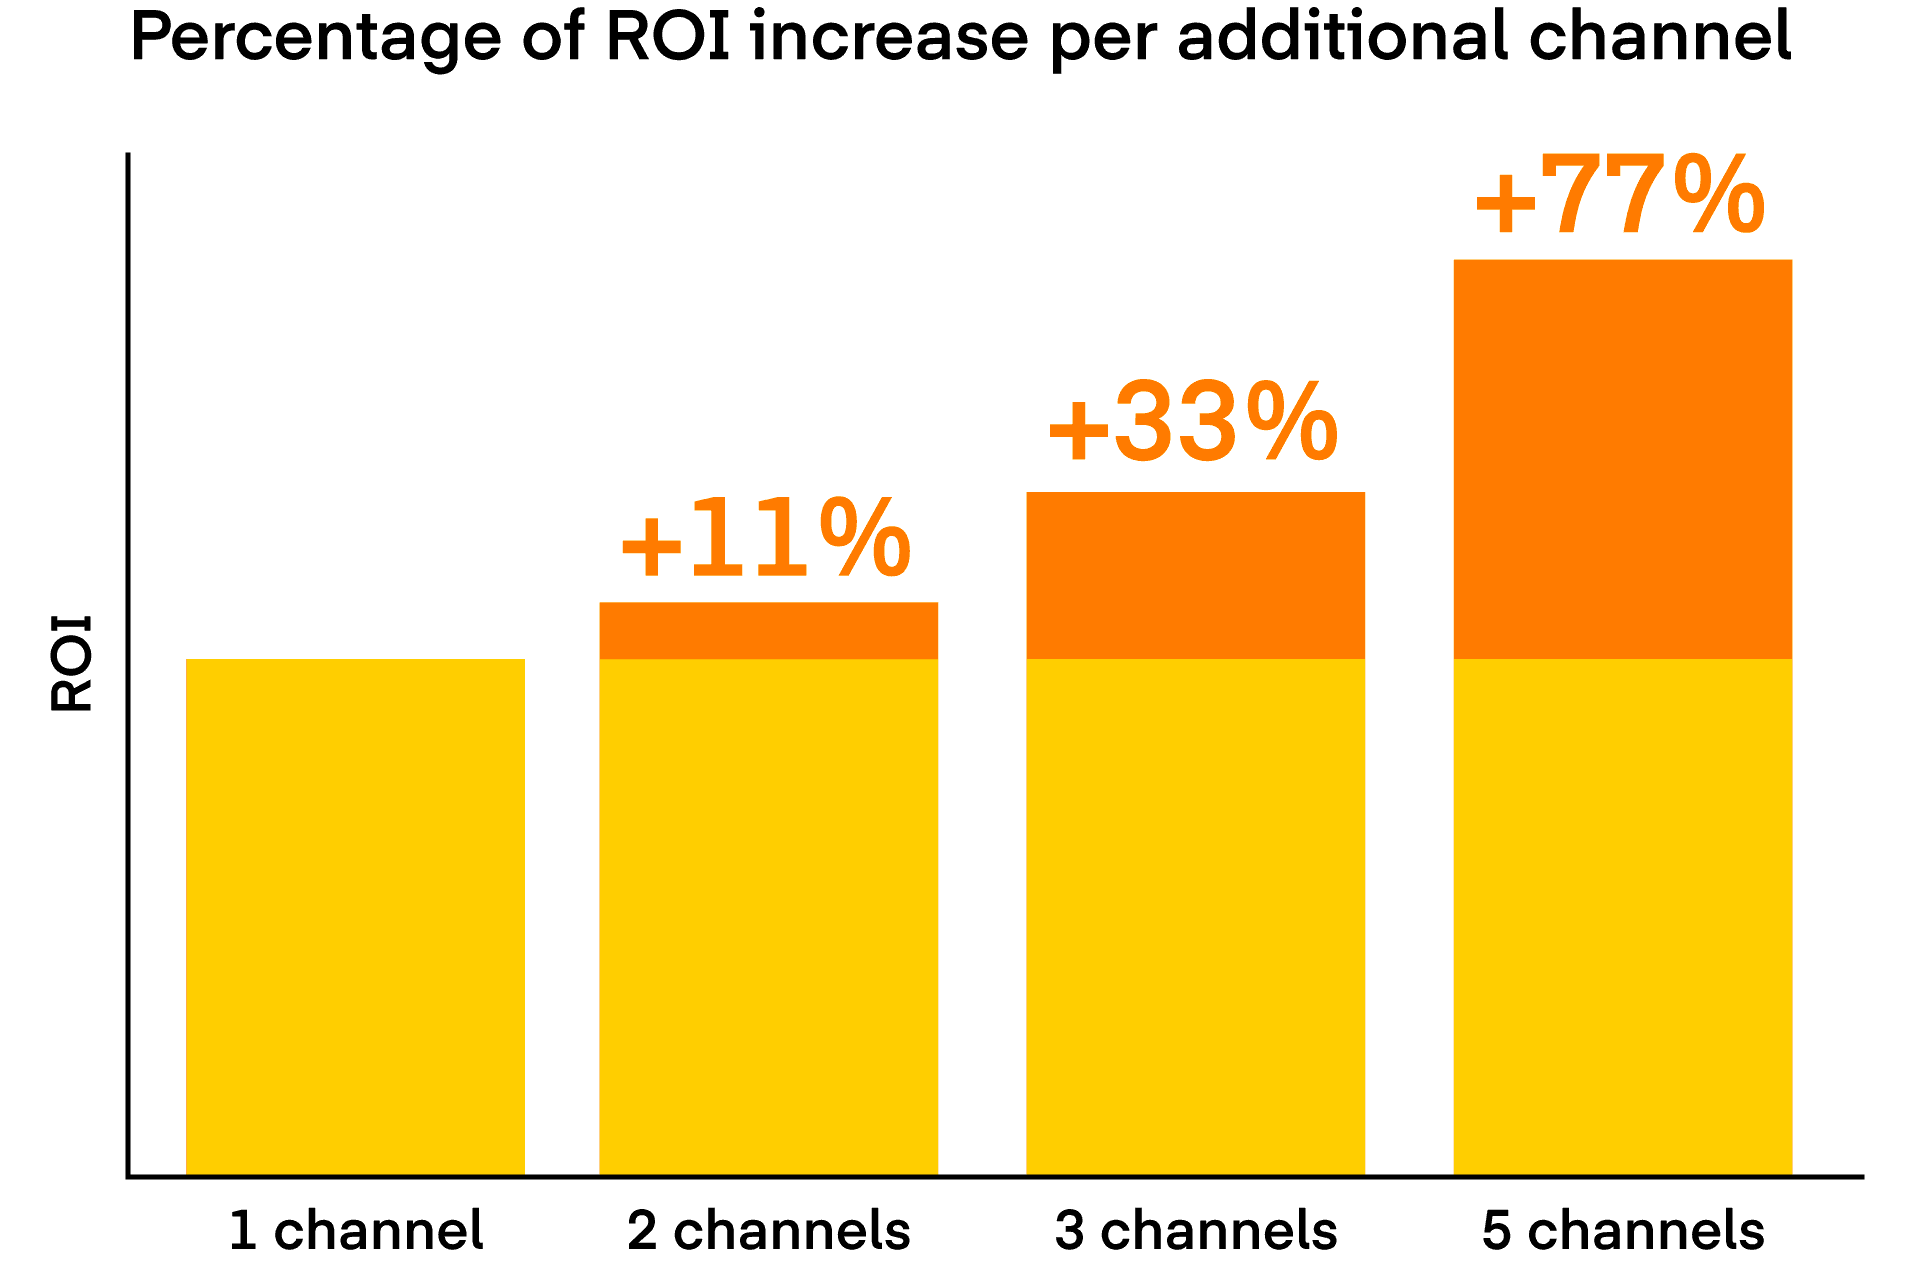 Data visualization displaying the percentage of ROI increase per additional channel on The Trade Desk